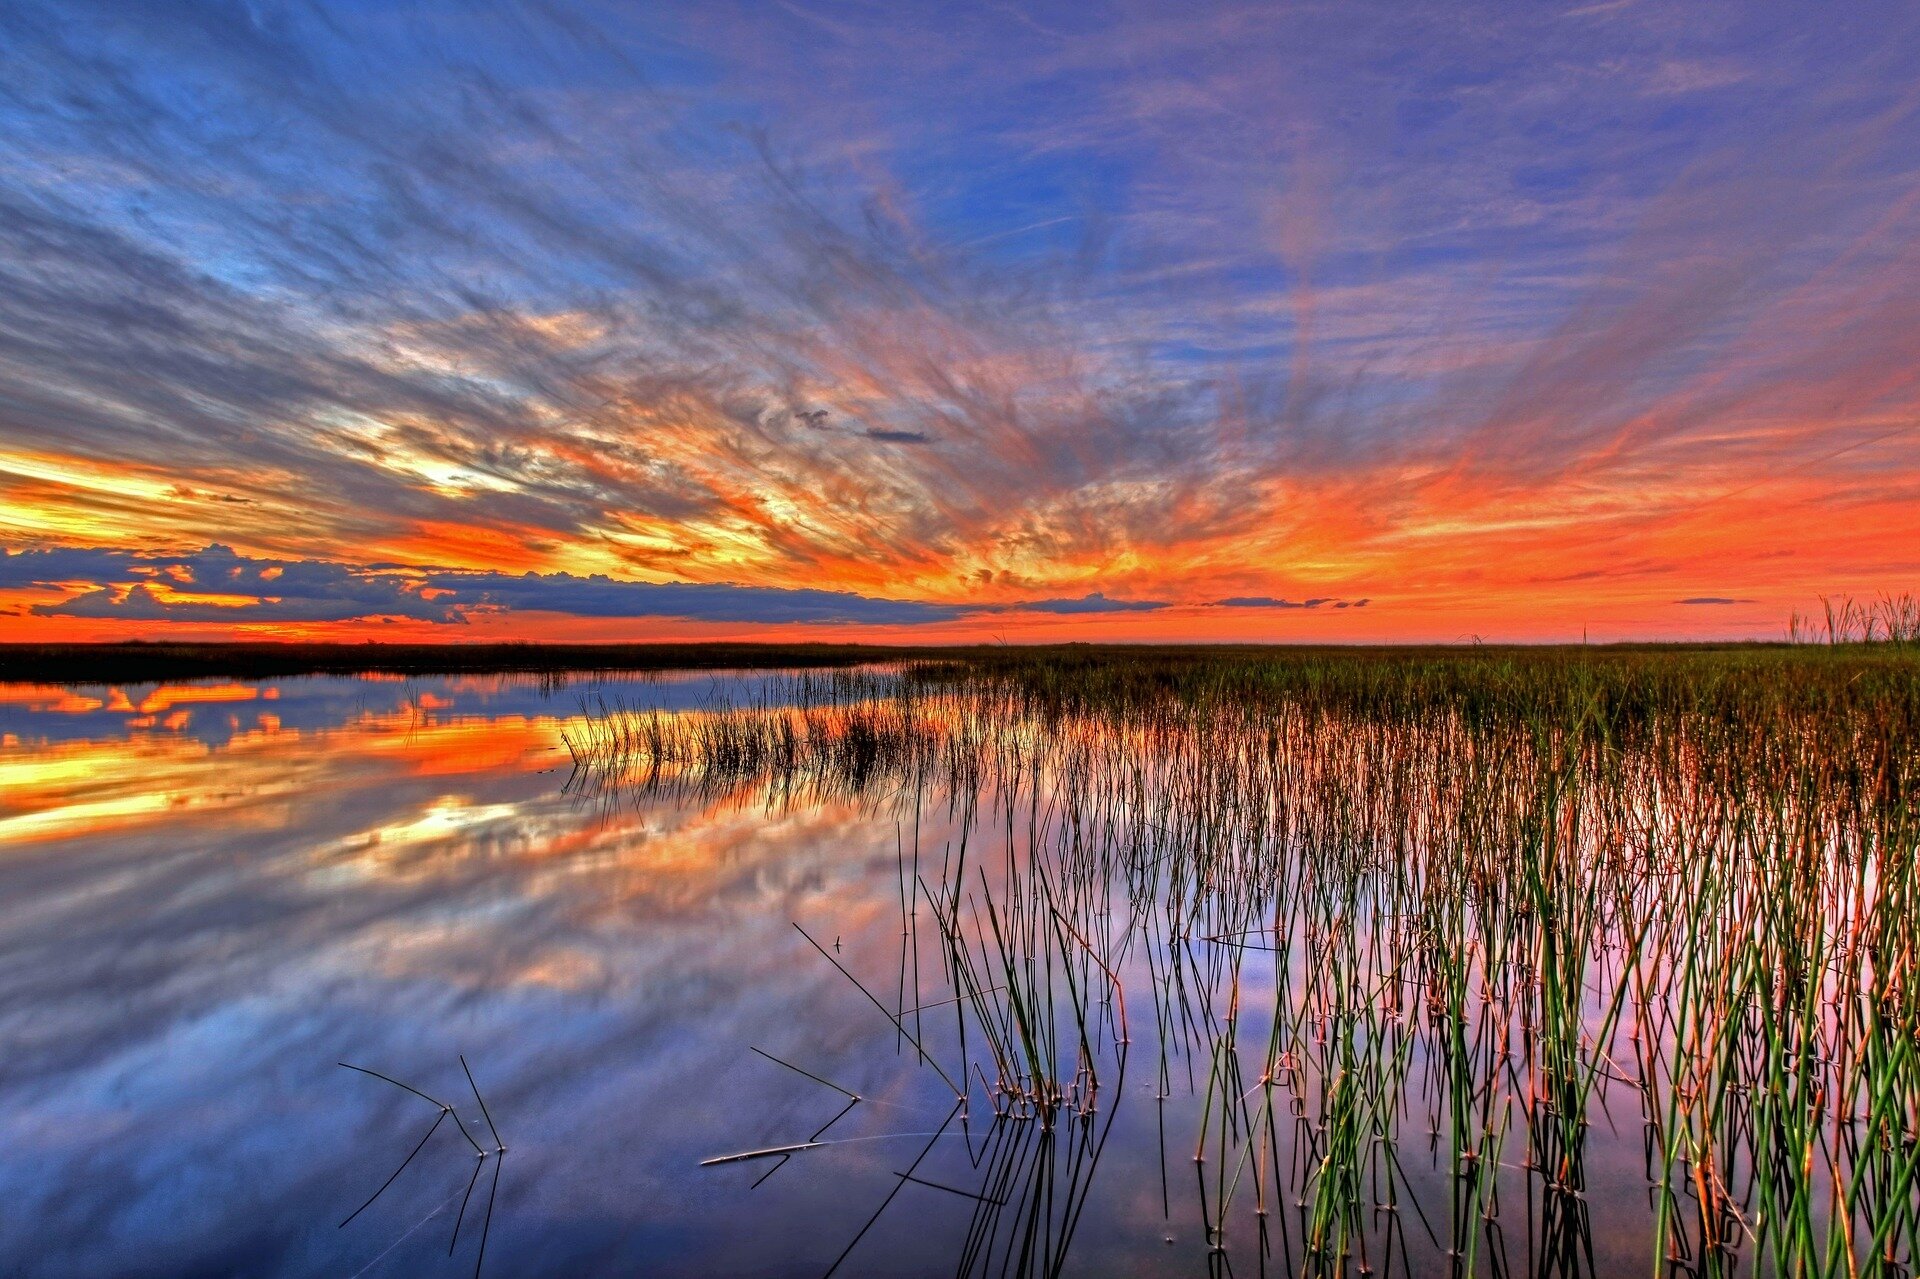 Everglades restoration to 'get the water right' estimated at $7.4 billion through 2030 - Phys.org